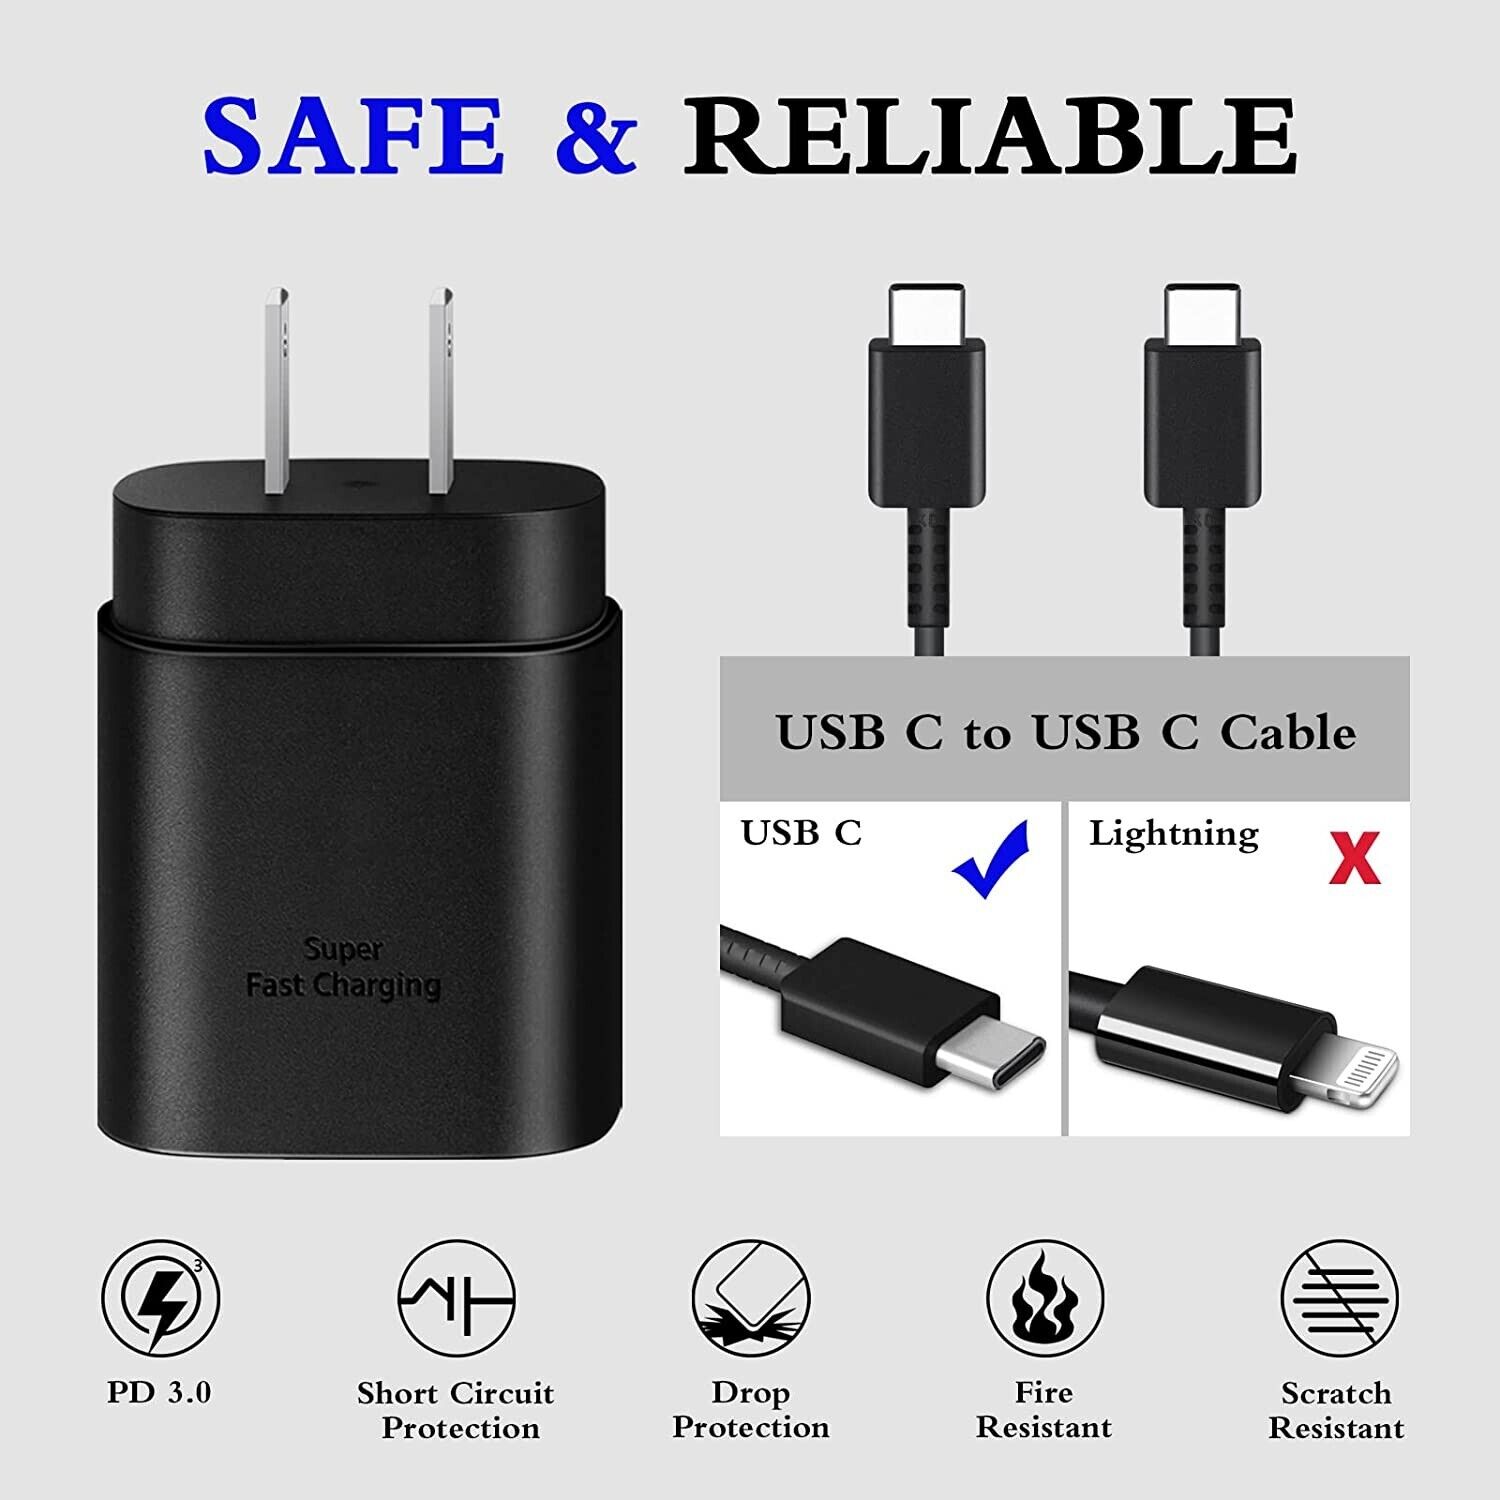 2x GENUINE 25 Watt SUPER Fast Wall Charger & USB-C Cable For Samsung S23 S22 S21 TCoology Quick Charge Rapid Charging, Galaxy S21 S21+ Ultra Plus 5G FE, Galaxy Note 10 10+ Ultra Plus 5G, Galaxy Note 20 20+ Ultra Plus 5G, Galaxy S20 S20+ Ultra 5G Ultra, LG V30 40 50 60 Stylo 4 5 6, Power Delivery PD, Galaxy A20 A21 A22 A50 A51 A52, LG V30 V40 V50 V60 Stylo 4 5 6, Galaxy Tab S3 S4 S5 S6 S7 Pro, Extra Long Charger Cord Wire Plug, Galaxy A70 A71 A32 S10 S10+ Plus, Galaxy S10e/S9/S9+/S8/S8+ Plus, 2020 2018 iPad Pro 11/12.9, Motorola Moto Edge Plus One Zoom, Moto G 5G Plus Hyper One Vision G8 G9, Galaxy A90 A91 A92 A72 S8 S9 Plus, Galaxy Note 8 9 Tab S8 Pro - фотография #5